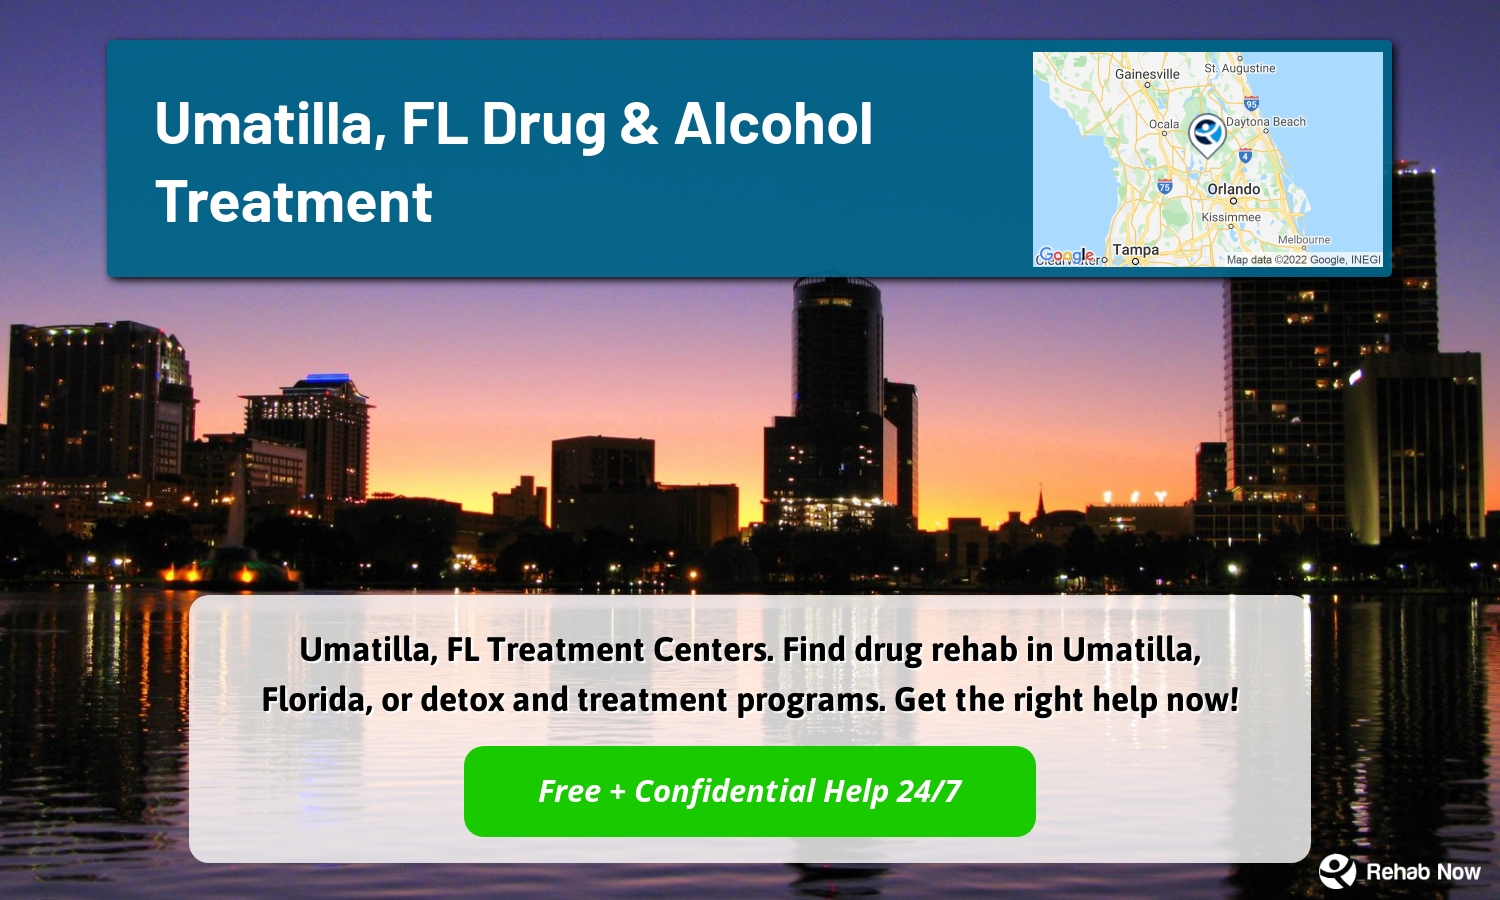 Umatilla, FL Treatment Centers. Find drug rehab in Umatilla, Florida, or detox and treatment programs. Get the right help now!